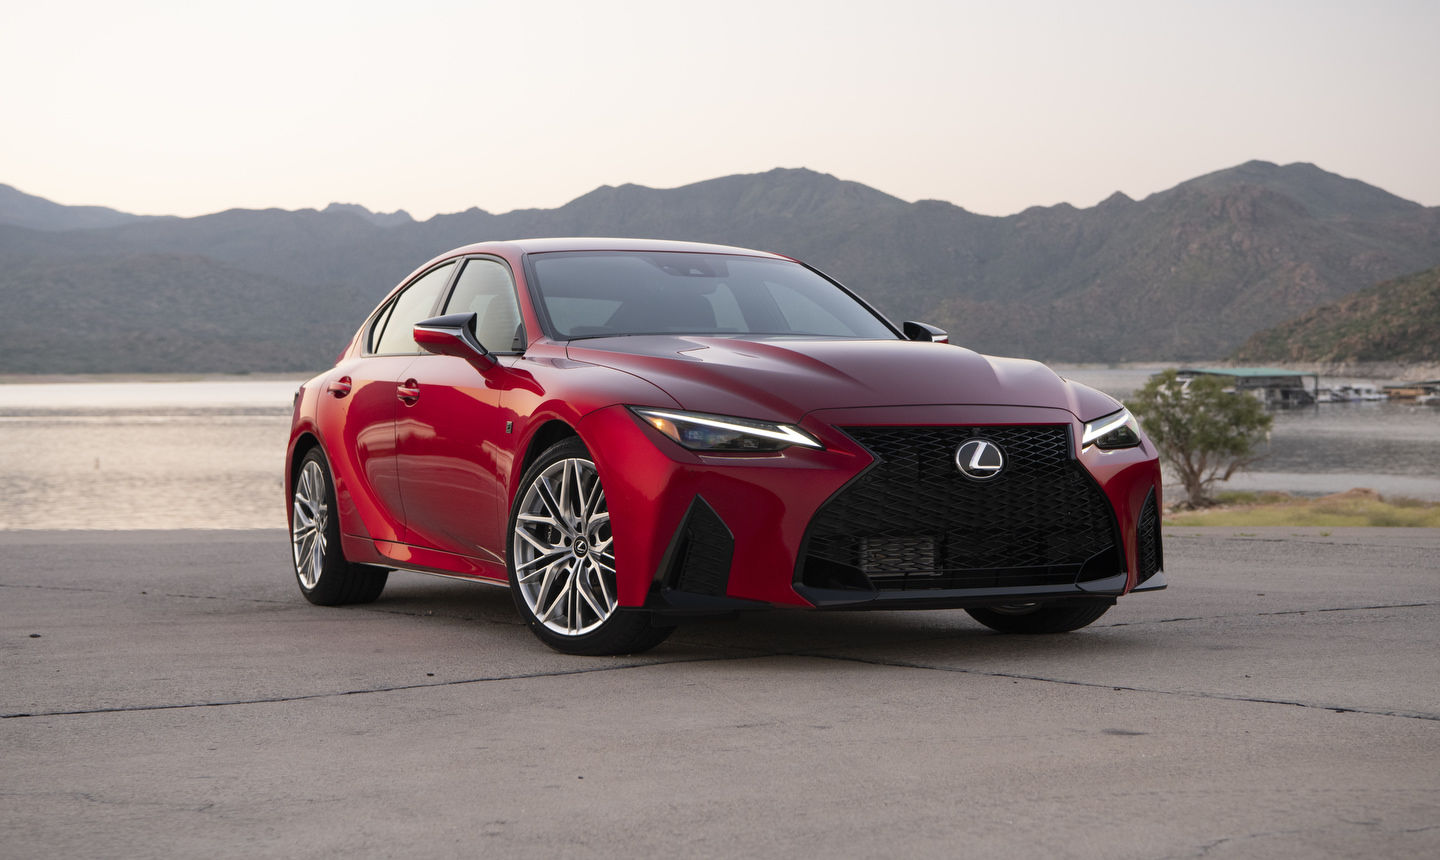 The 2022 Lexus IS 500 set to deliver outstanding performance at just $72,900